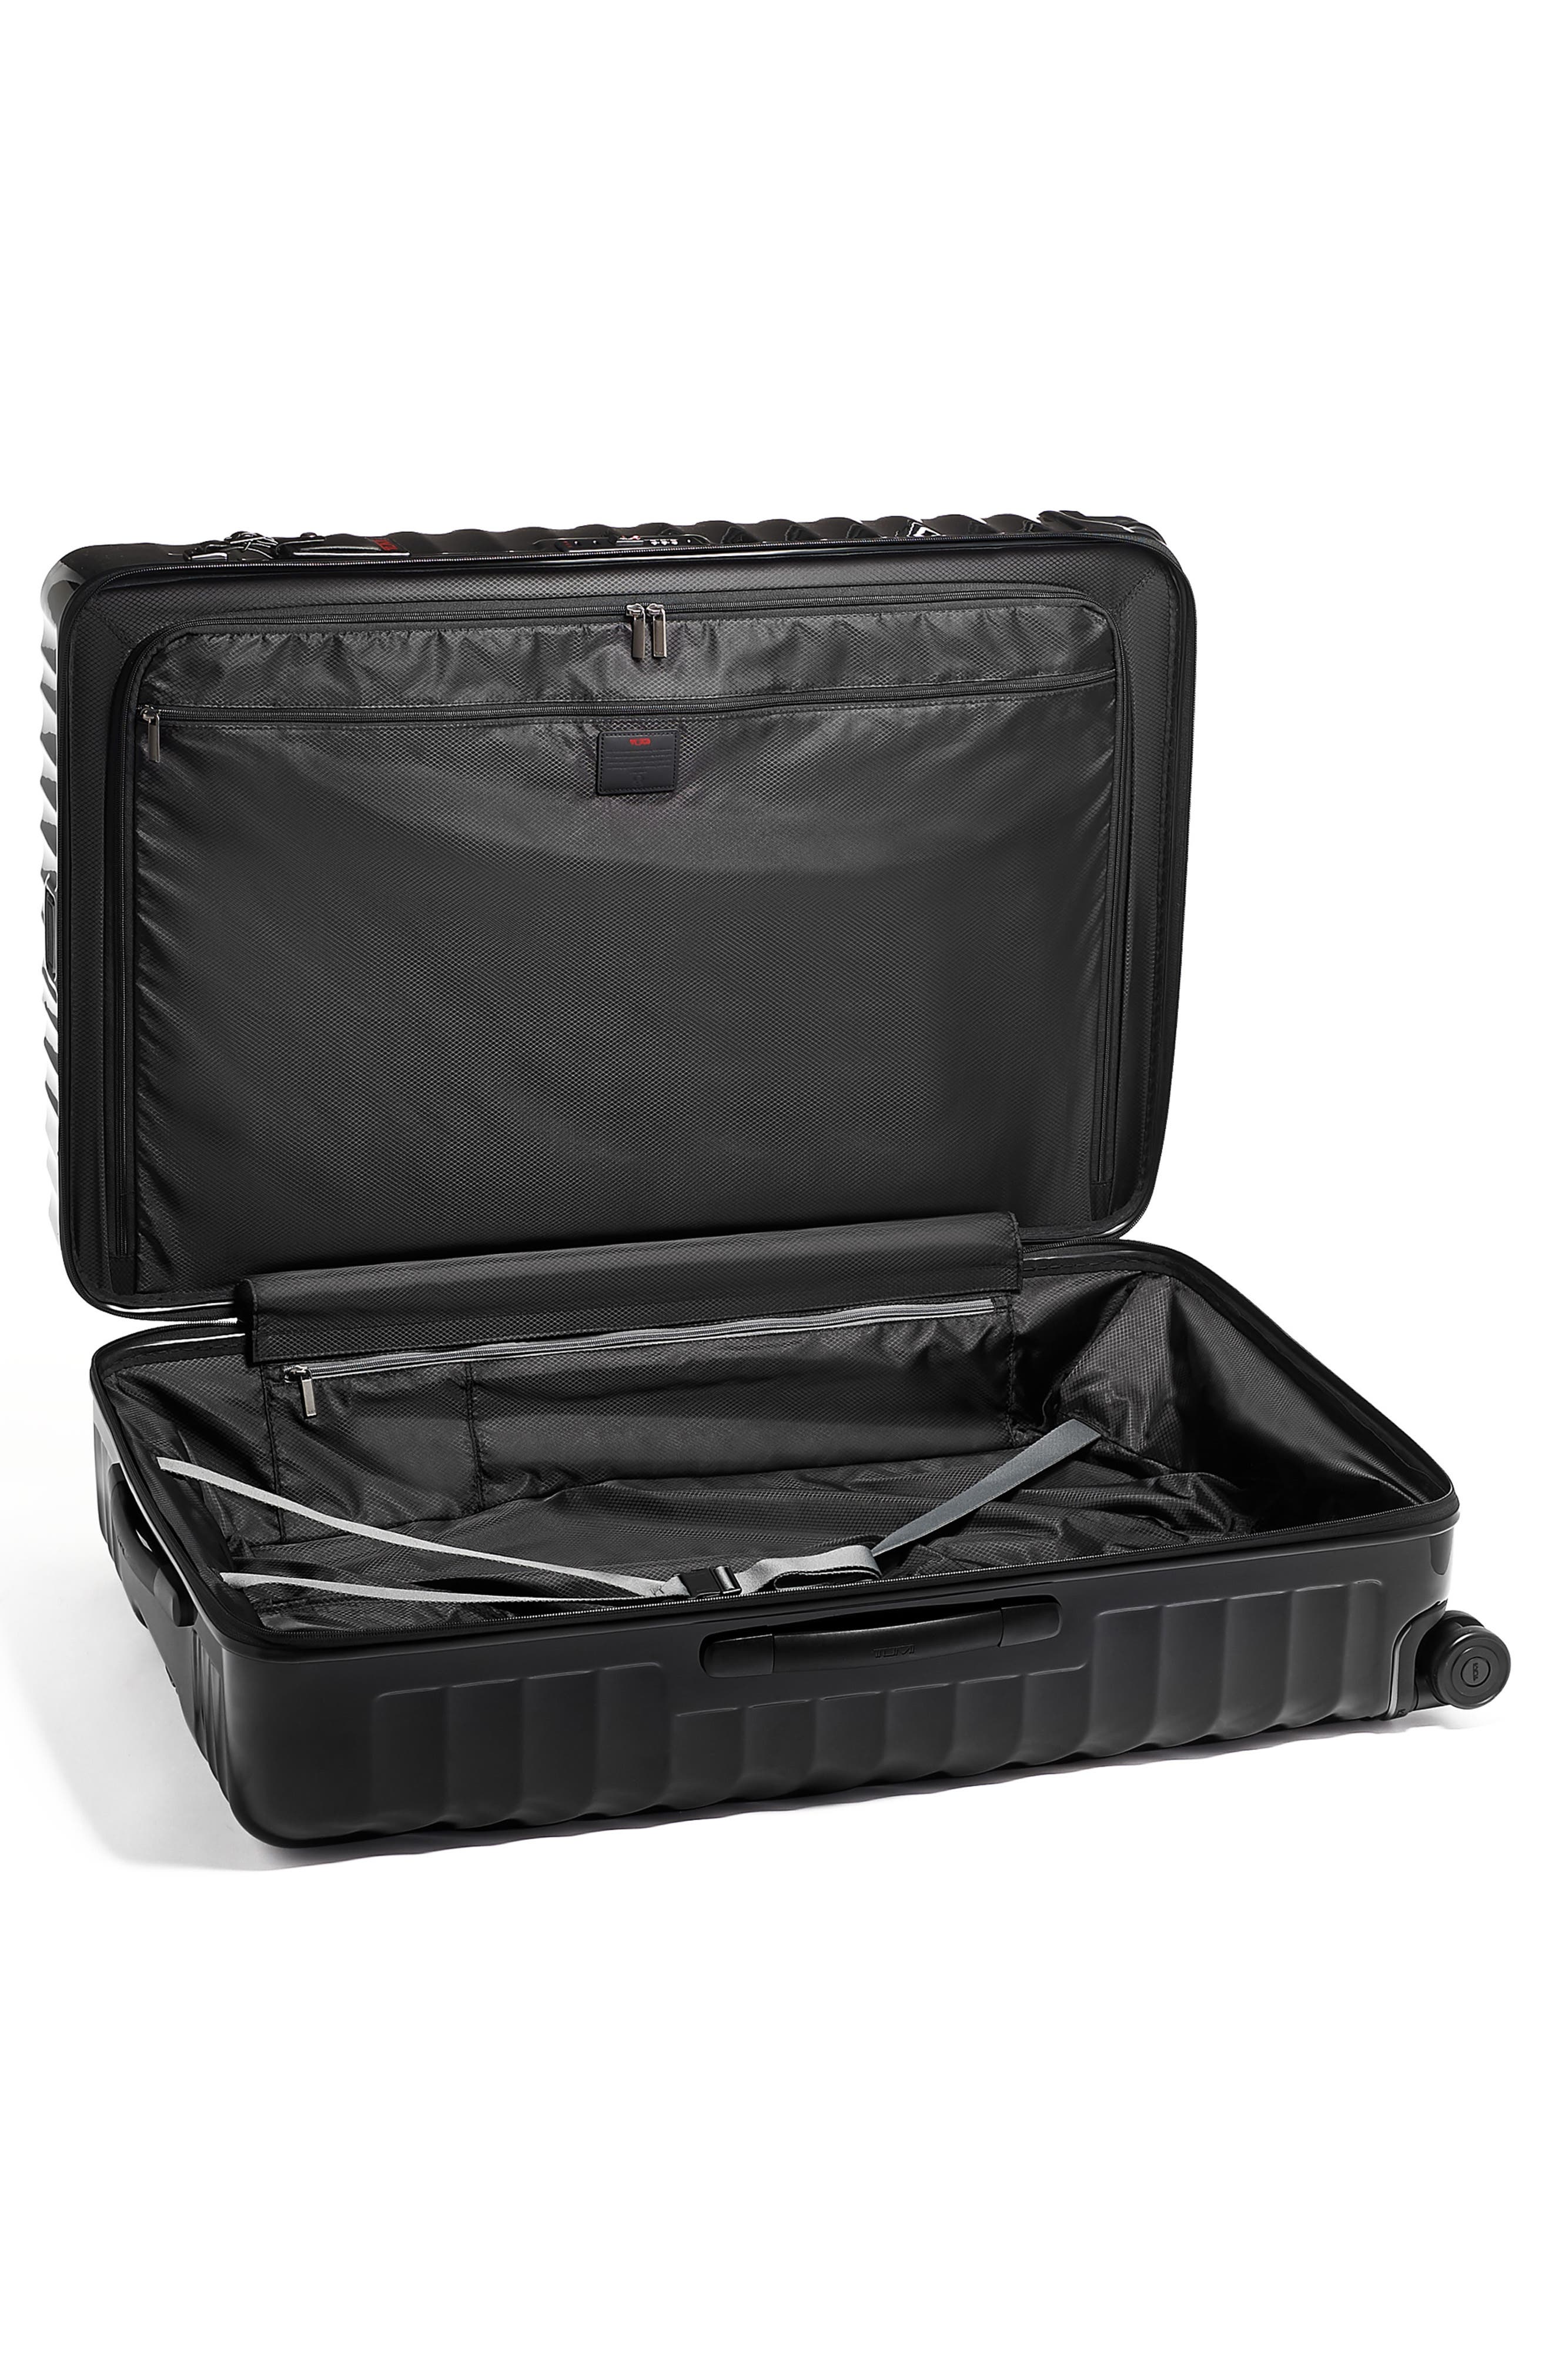 Tumi Gray 19 Degree Extended Trip Expandable Packing Case